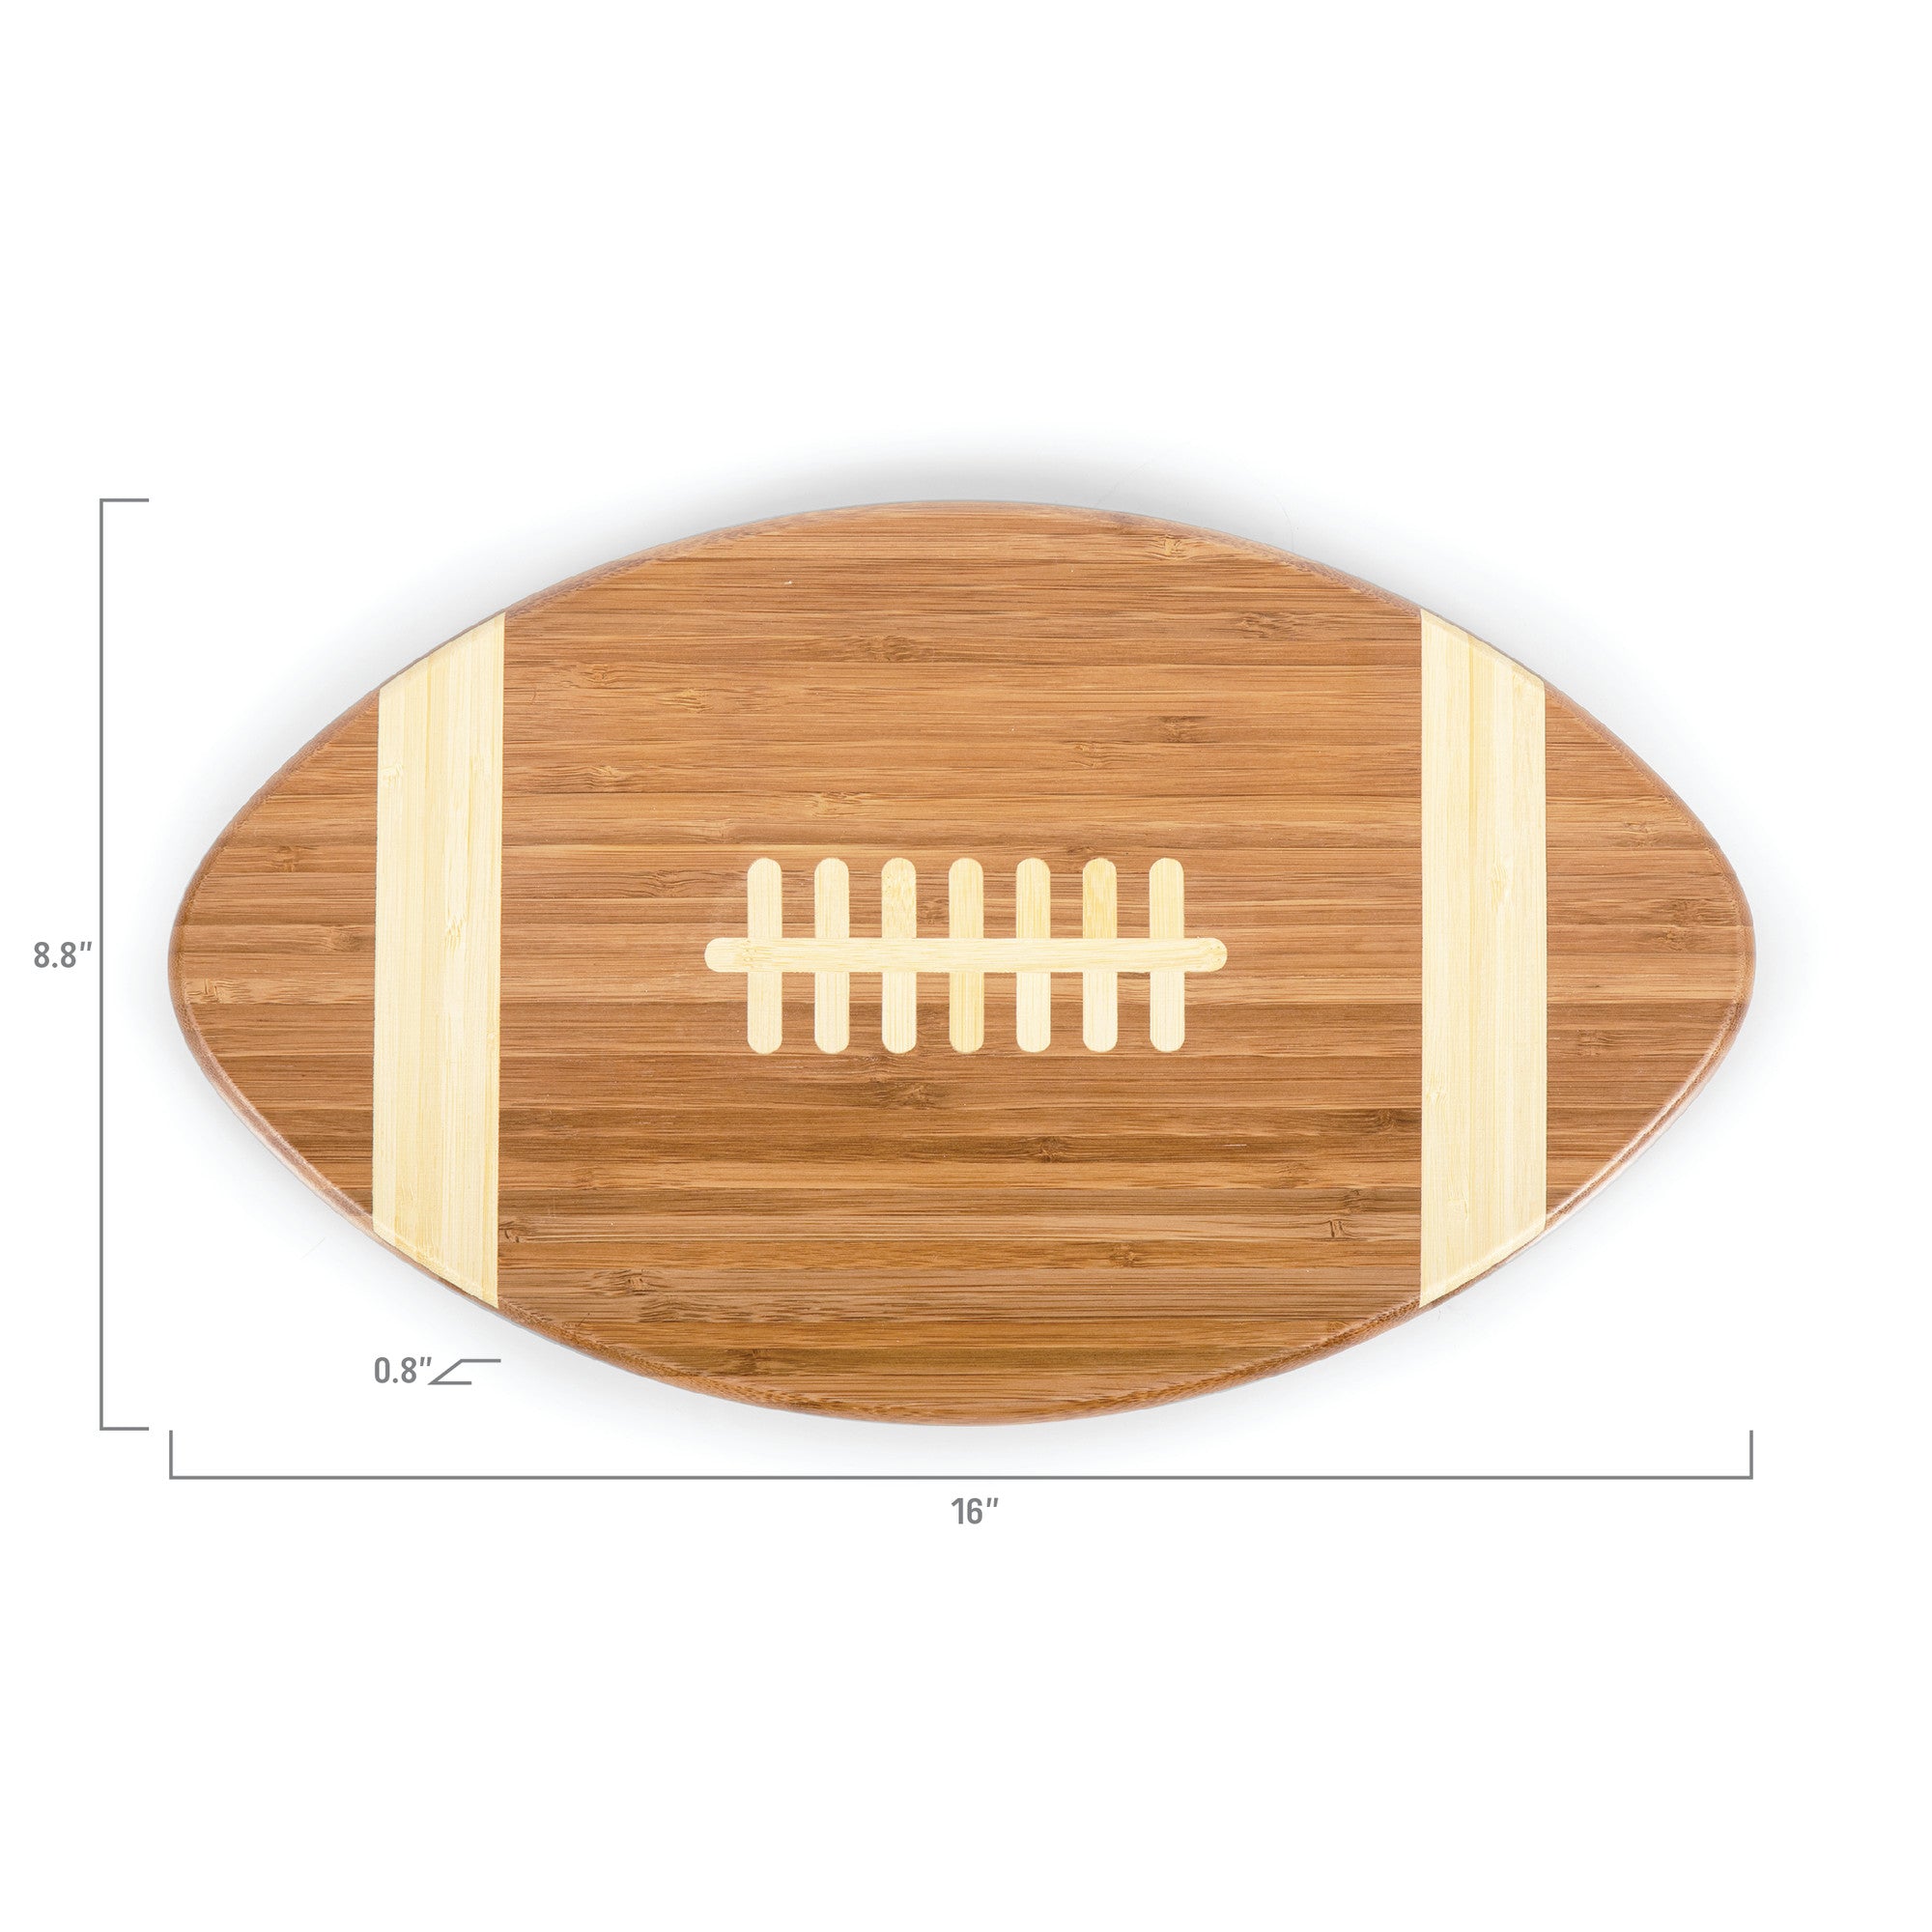 Pittsburgh Panthers - Touchdown! Football Cutting Board & Serving Tray